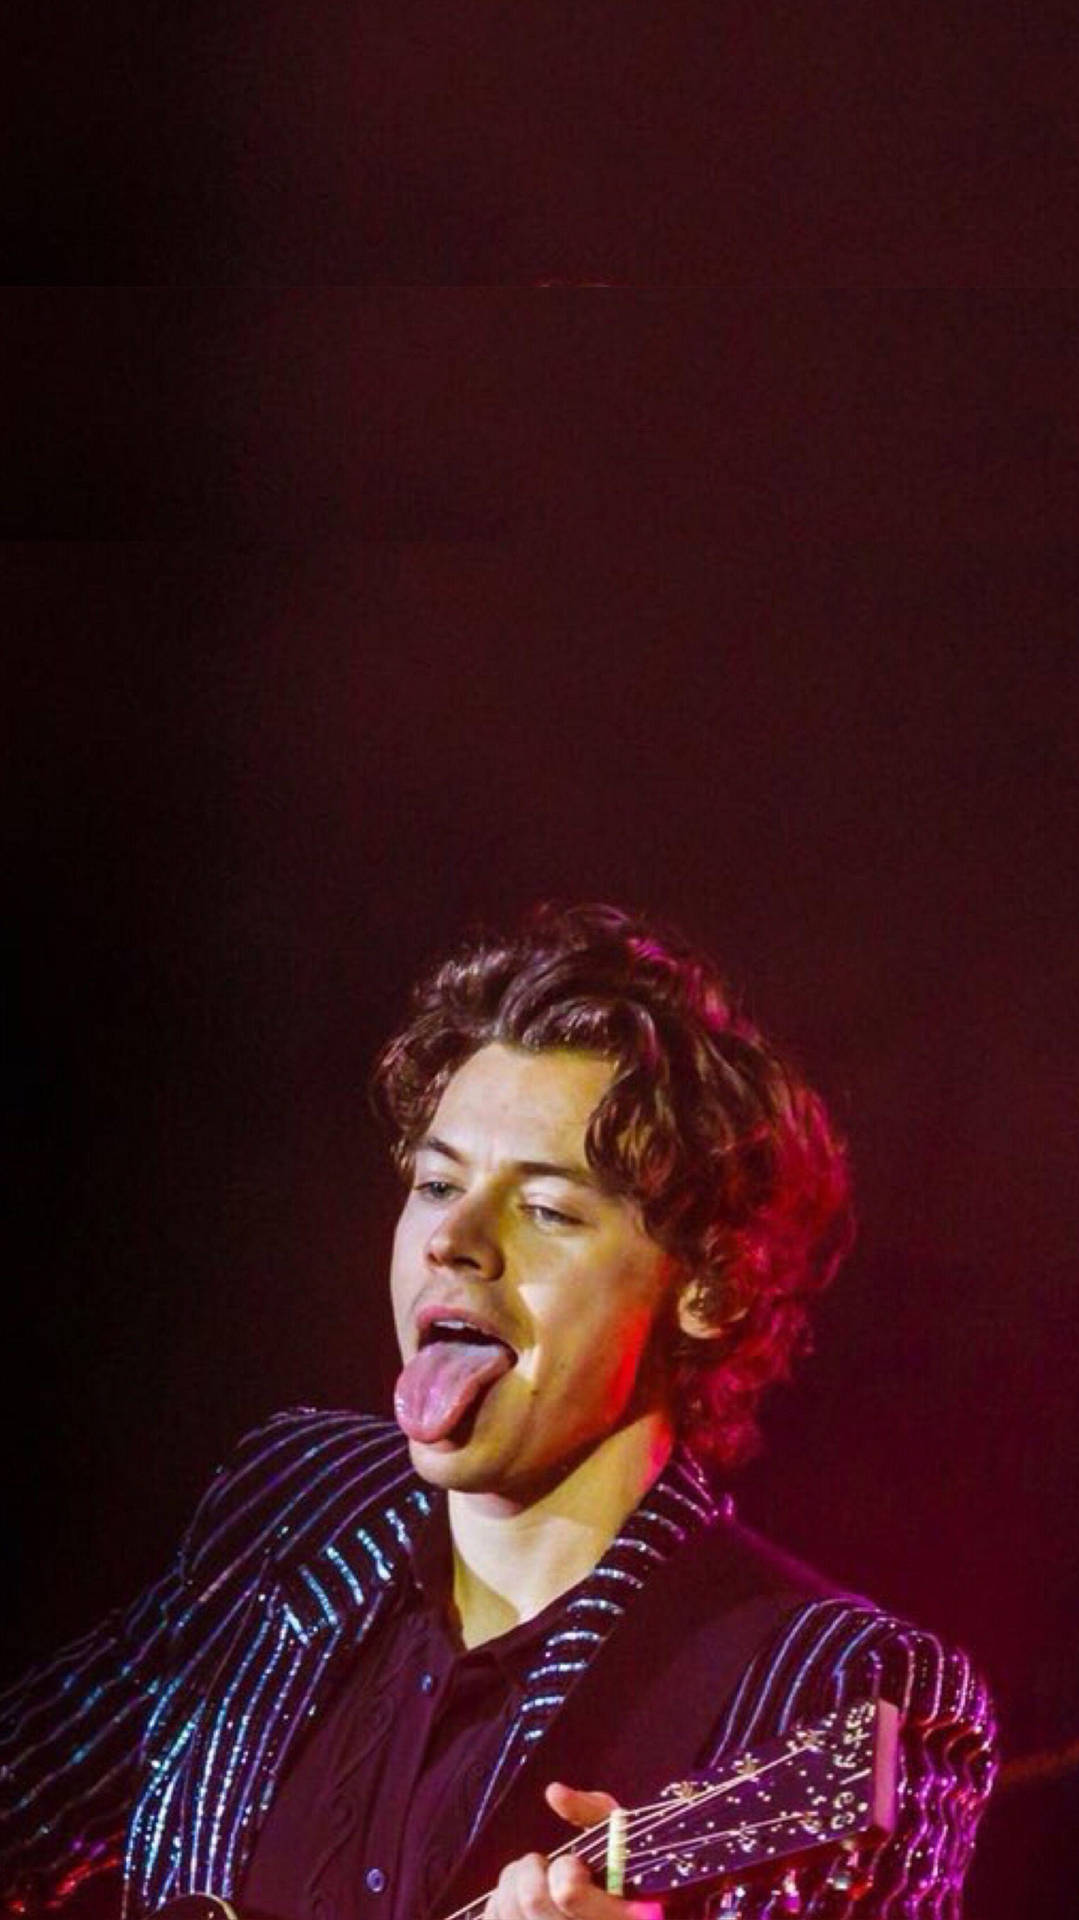 Iphone Harry Styles Sticking Out His Tongue Wallpaper